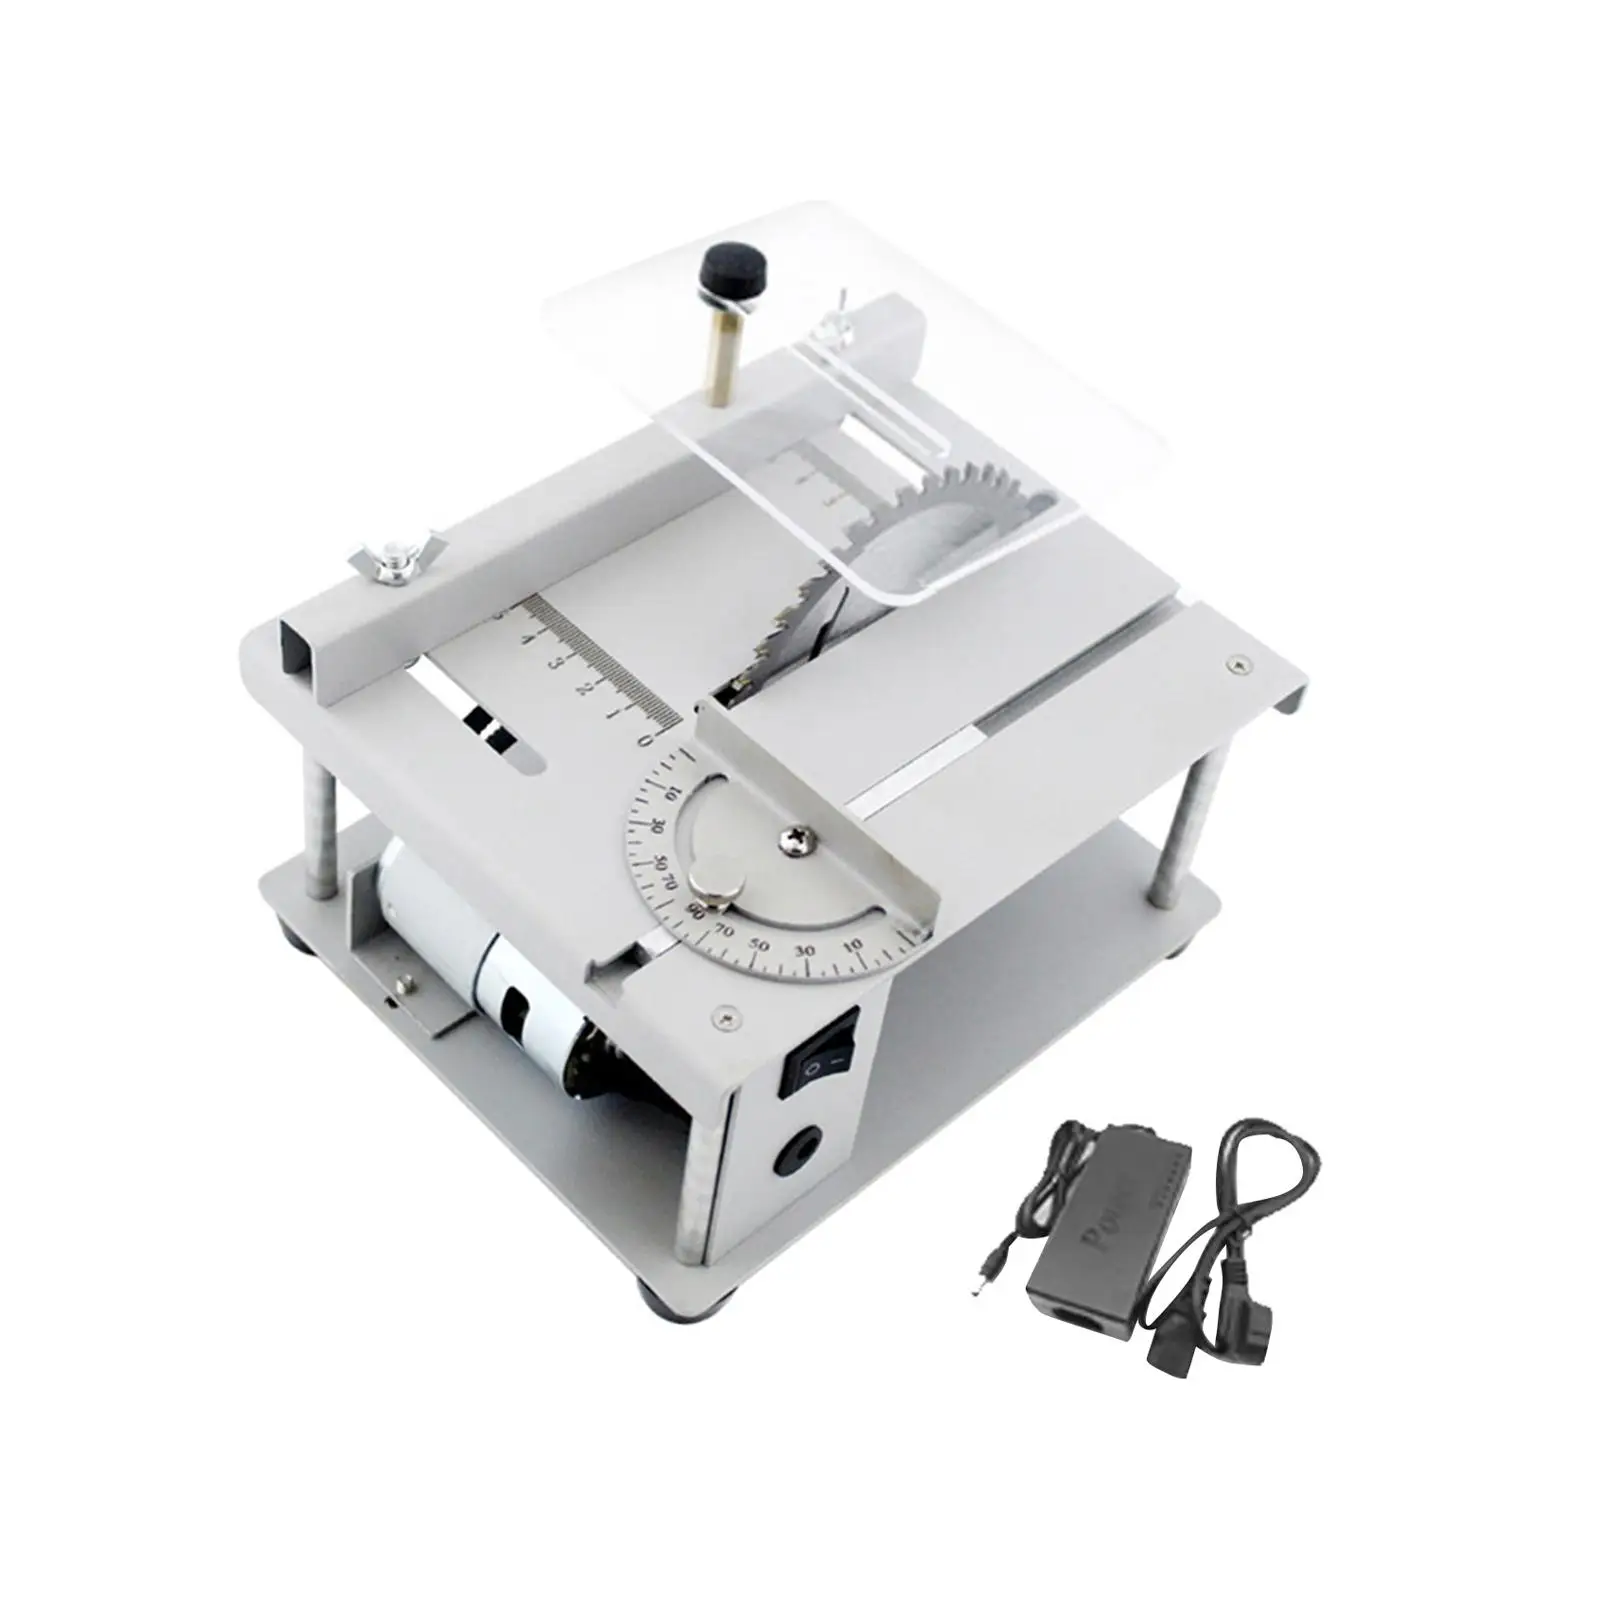 Mini Table Saw DIY Wood Acrylic Handmade Model Cutter Machine Woodworking Bench Saw for Wood Crafts Miniatures Metal Aluminum